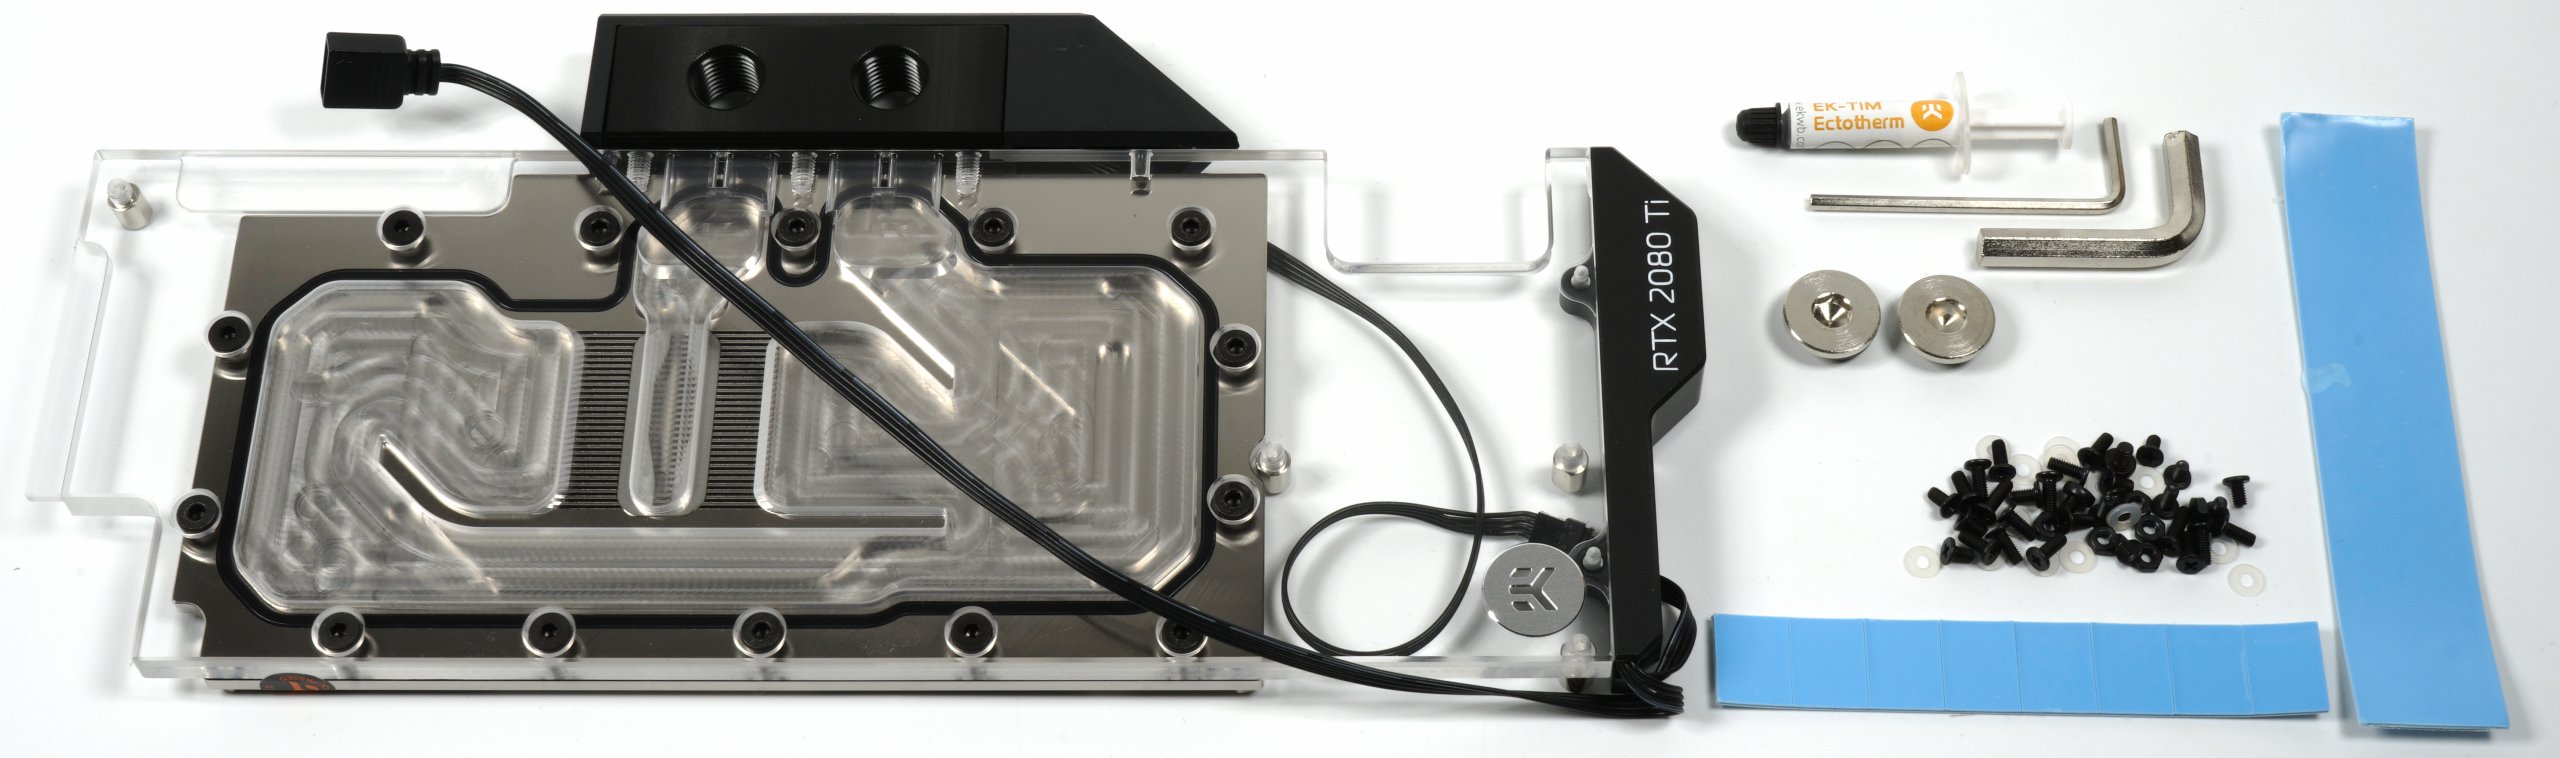 Four water blocks for the GeForce RTX 2080 Ti in final comparison 